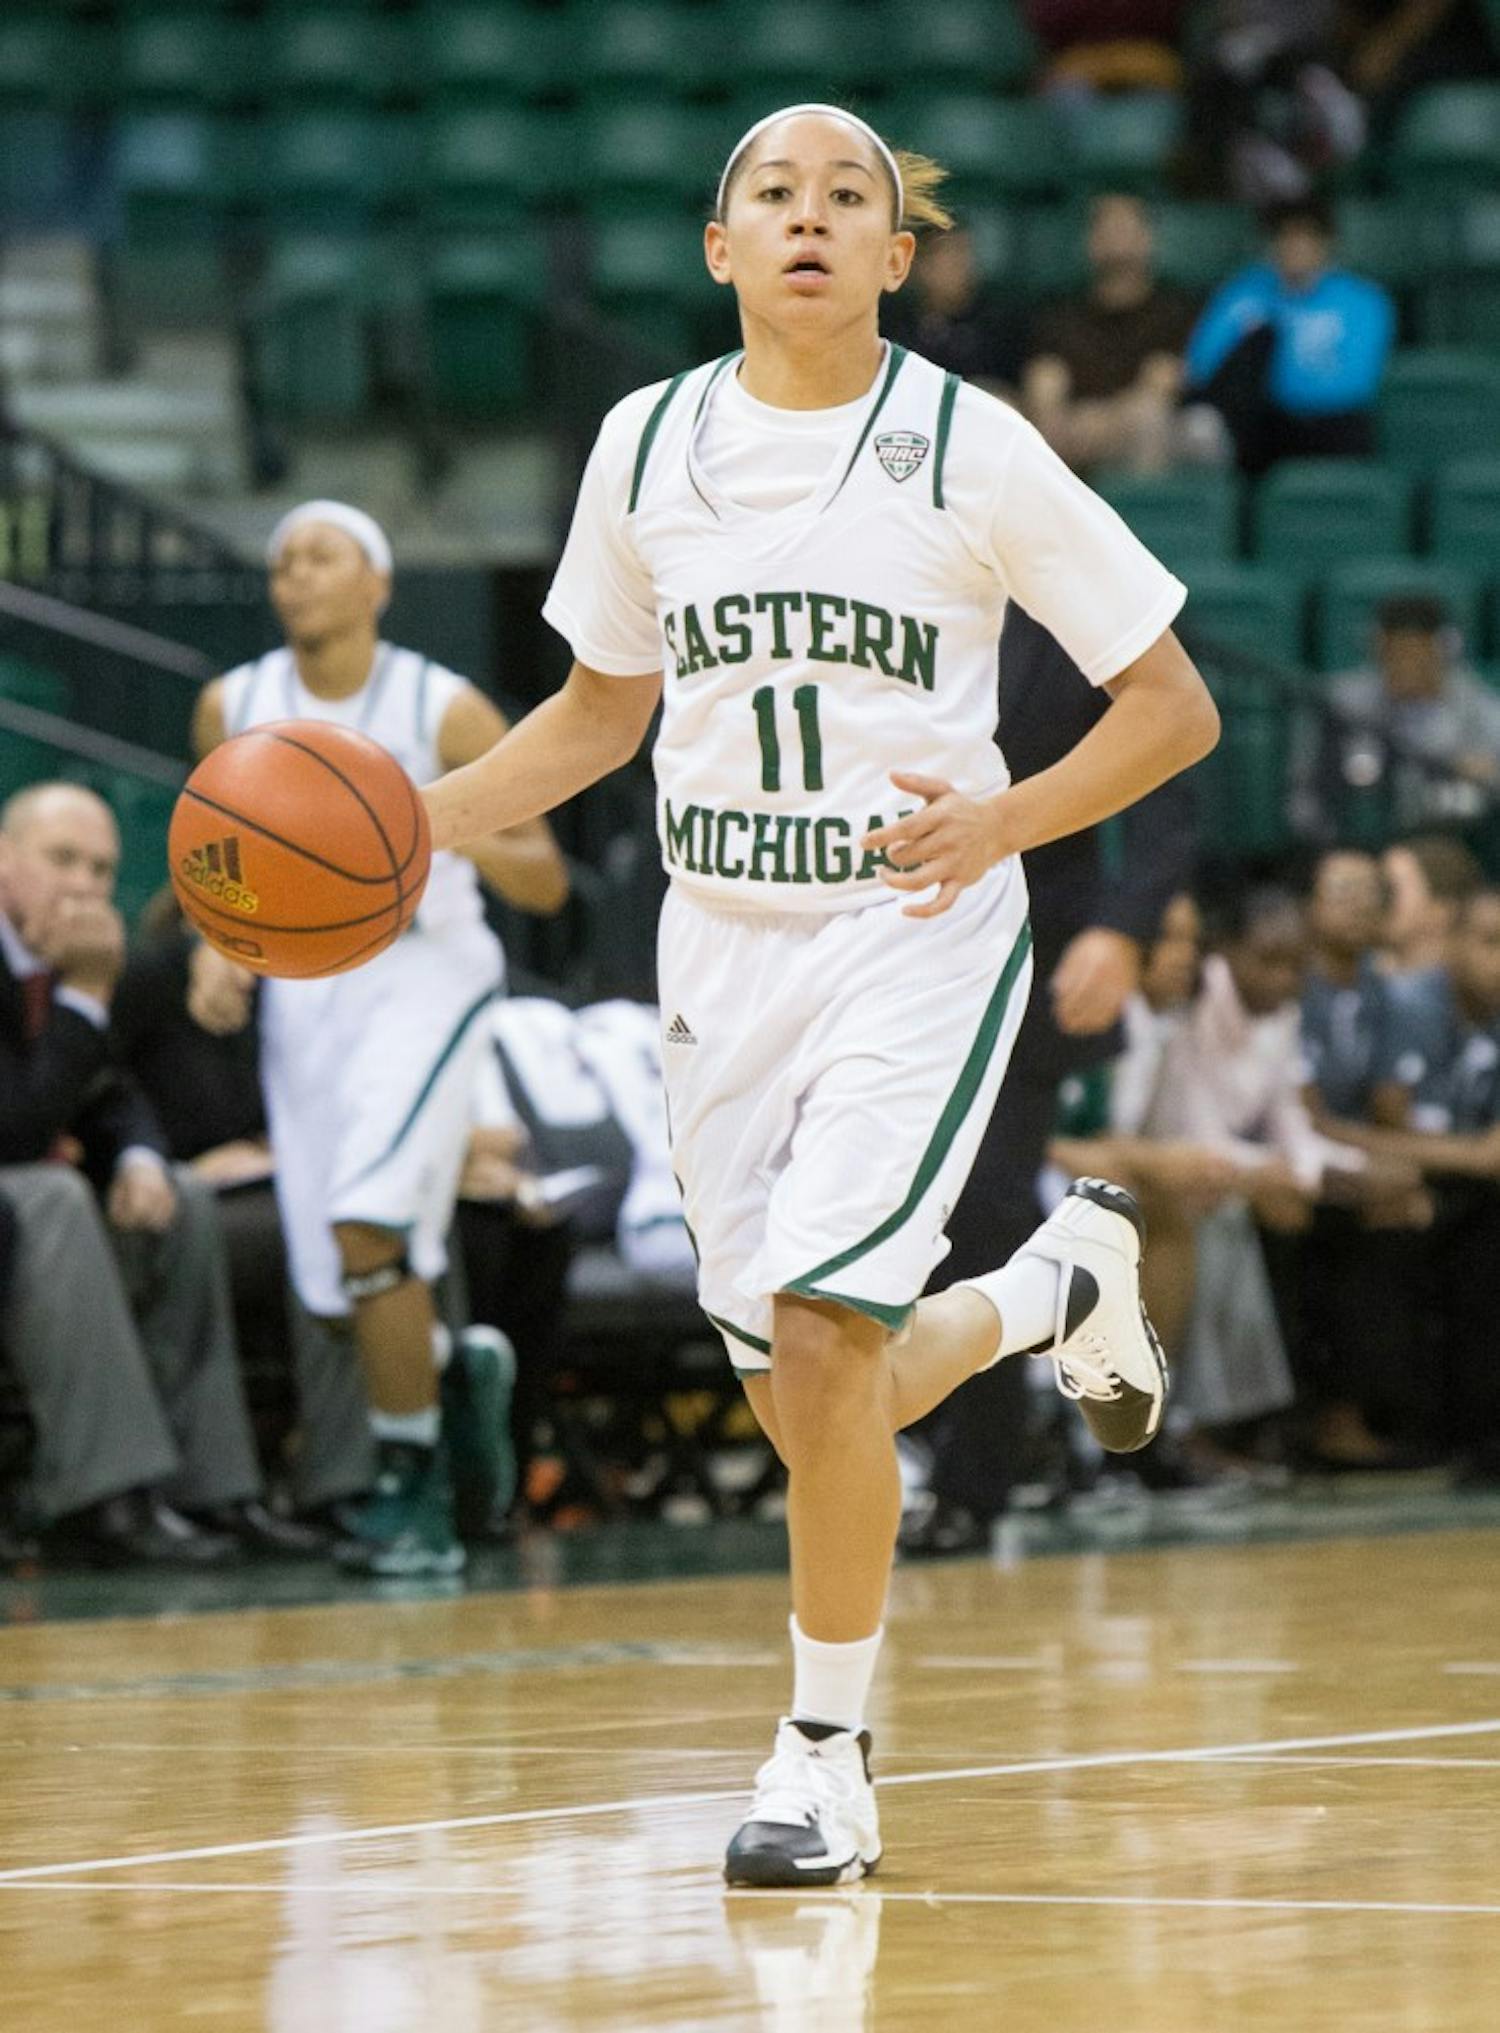 EMU guard Desyree Thomas had 8 assists in Eastern Michigan's 101-52 win over Madonna University Friday afternoon.